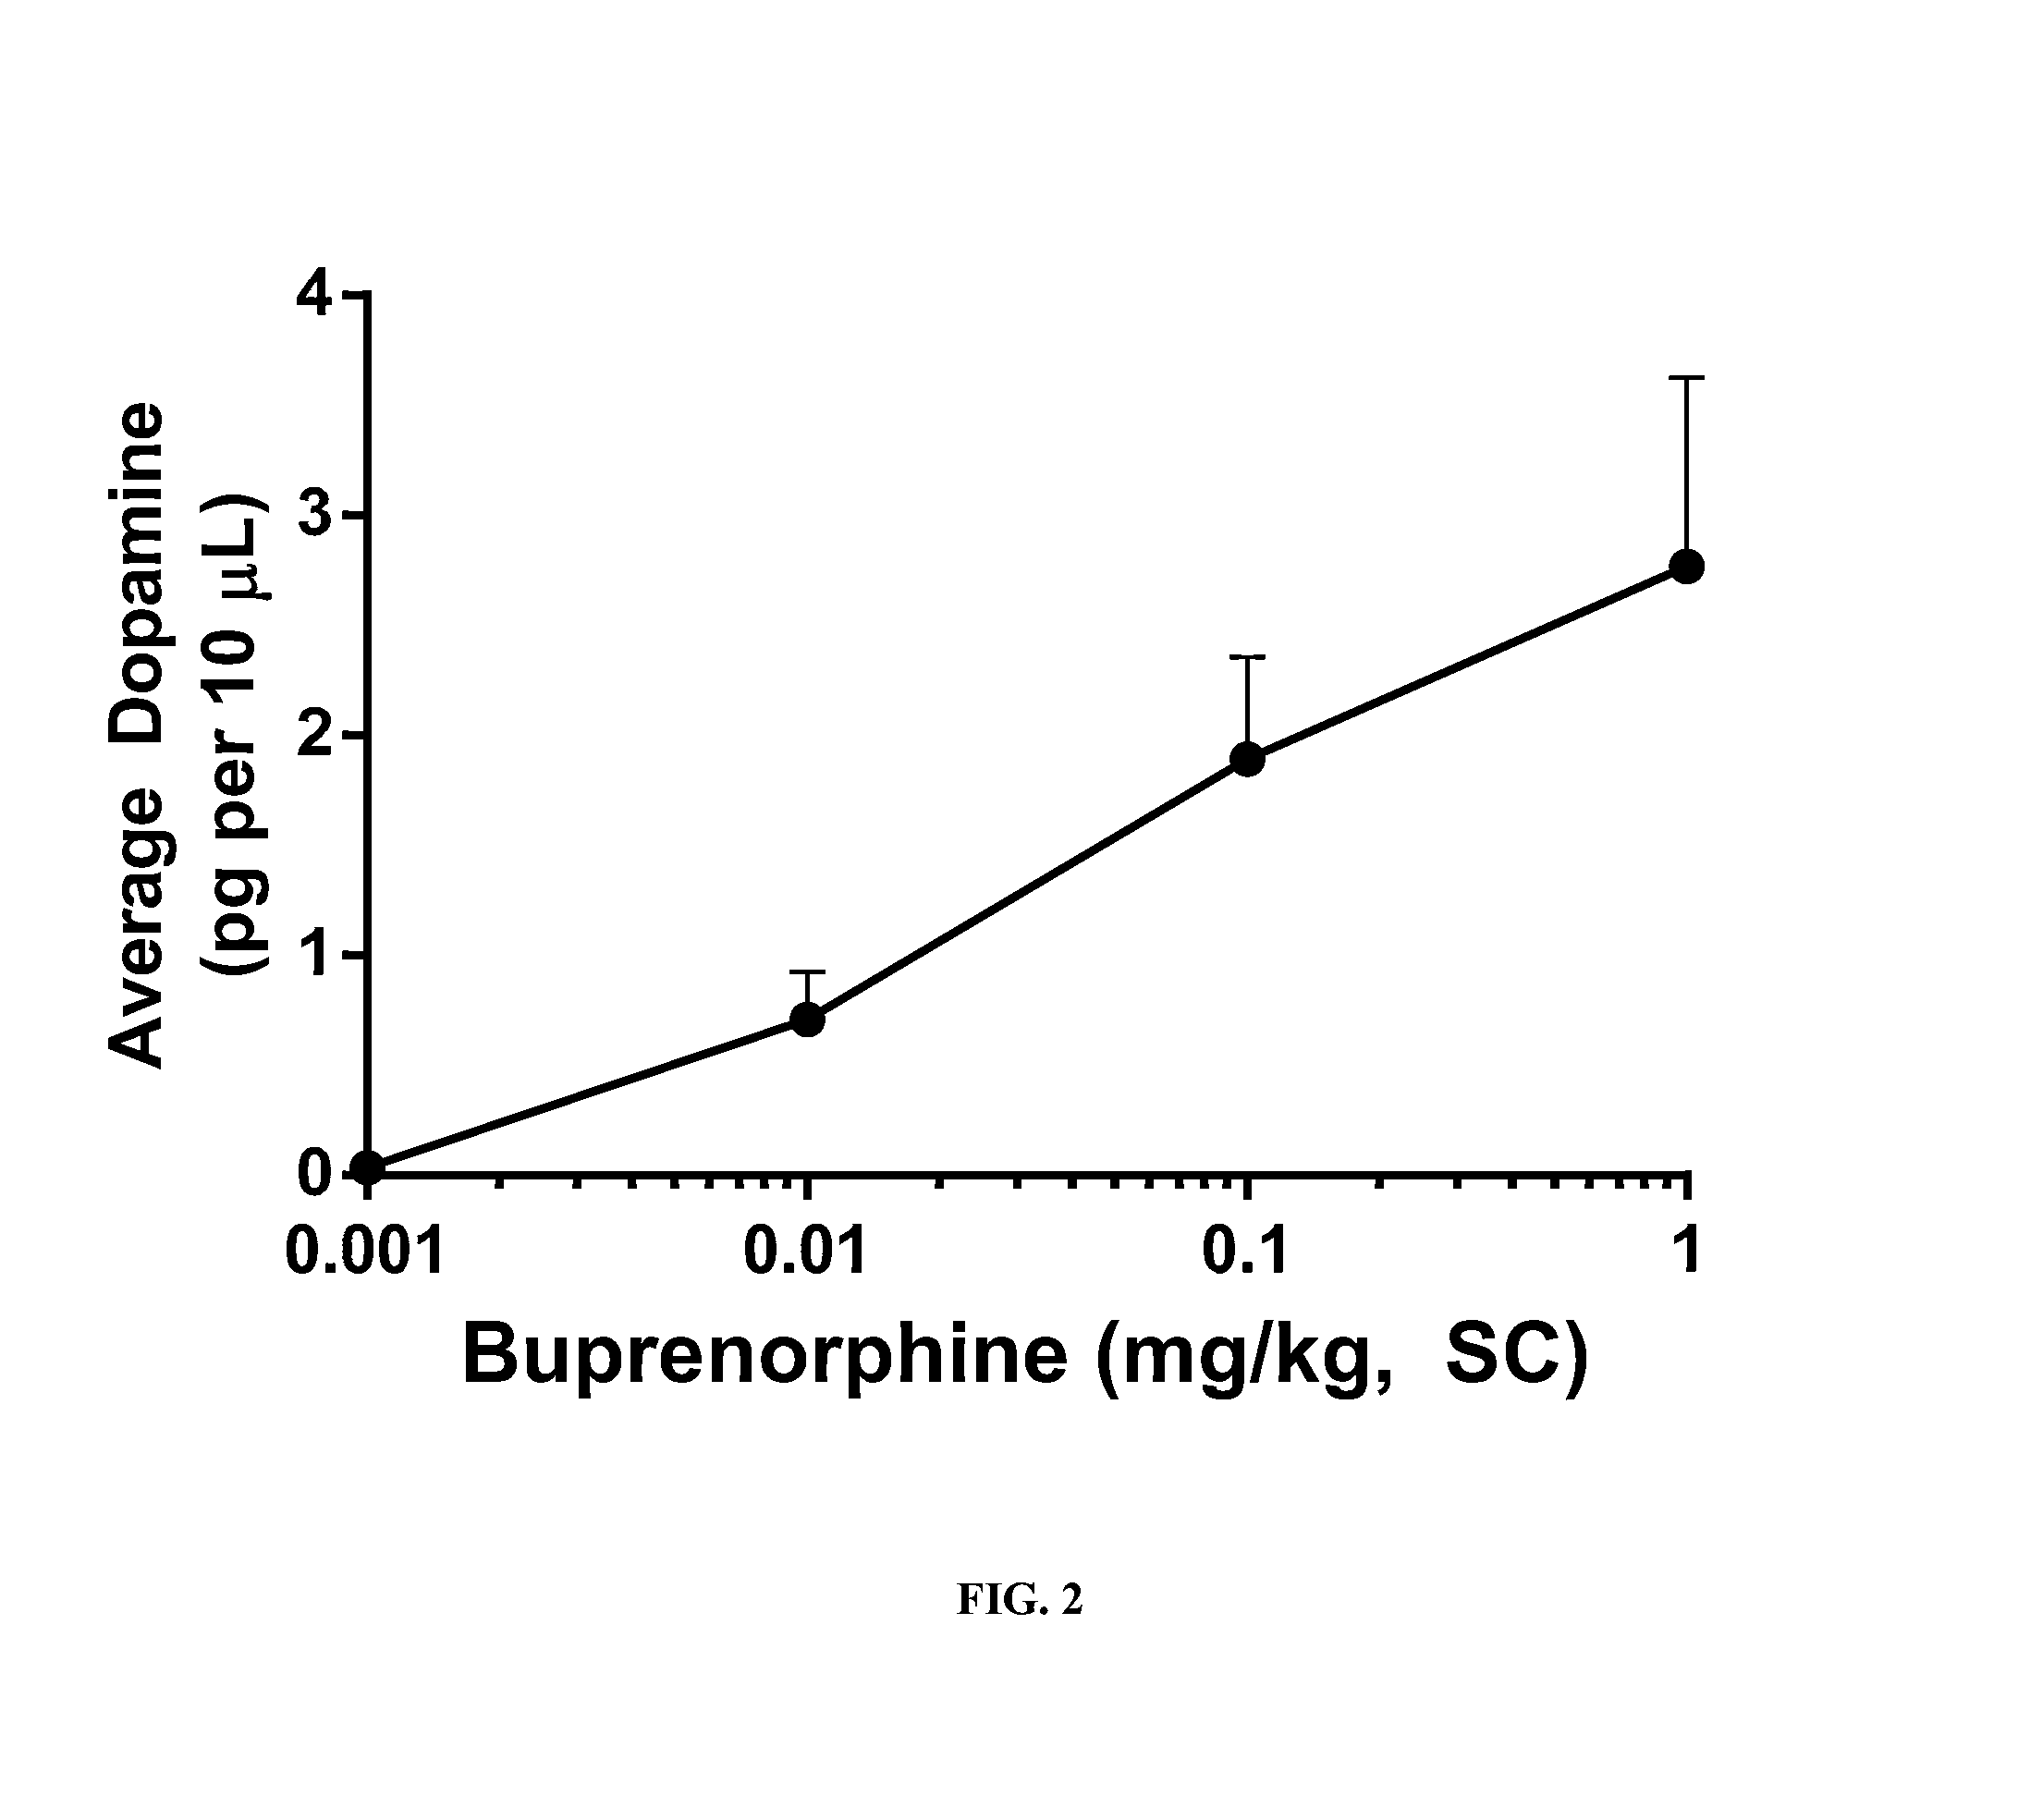 Compositions of buprenorphine and μ antagonists